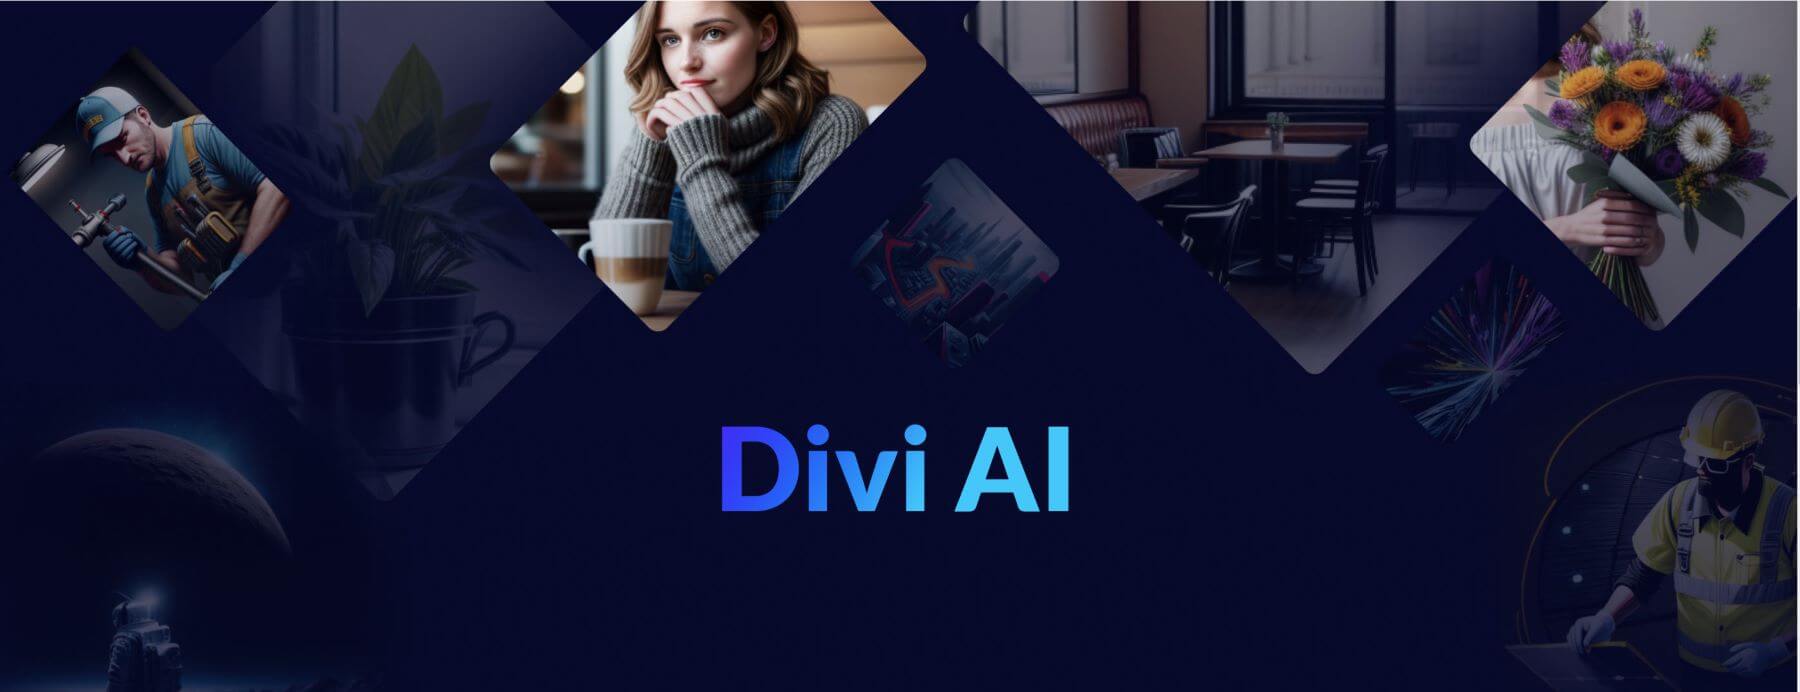 Divi AI for image and text generation